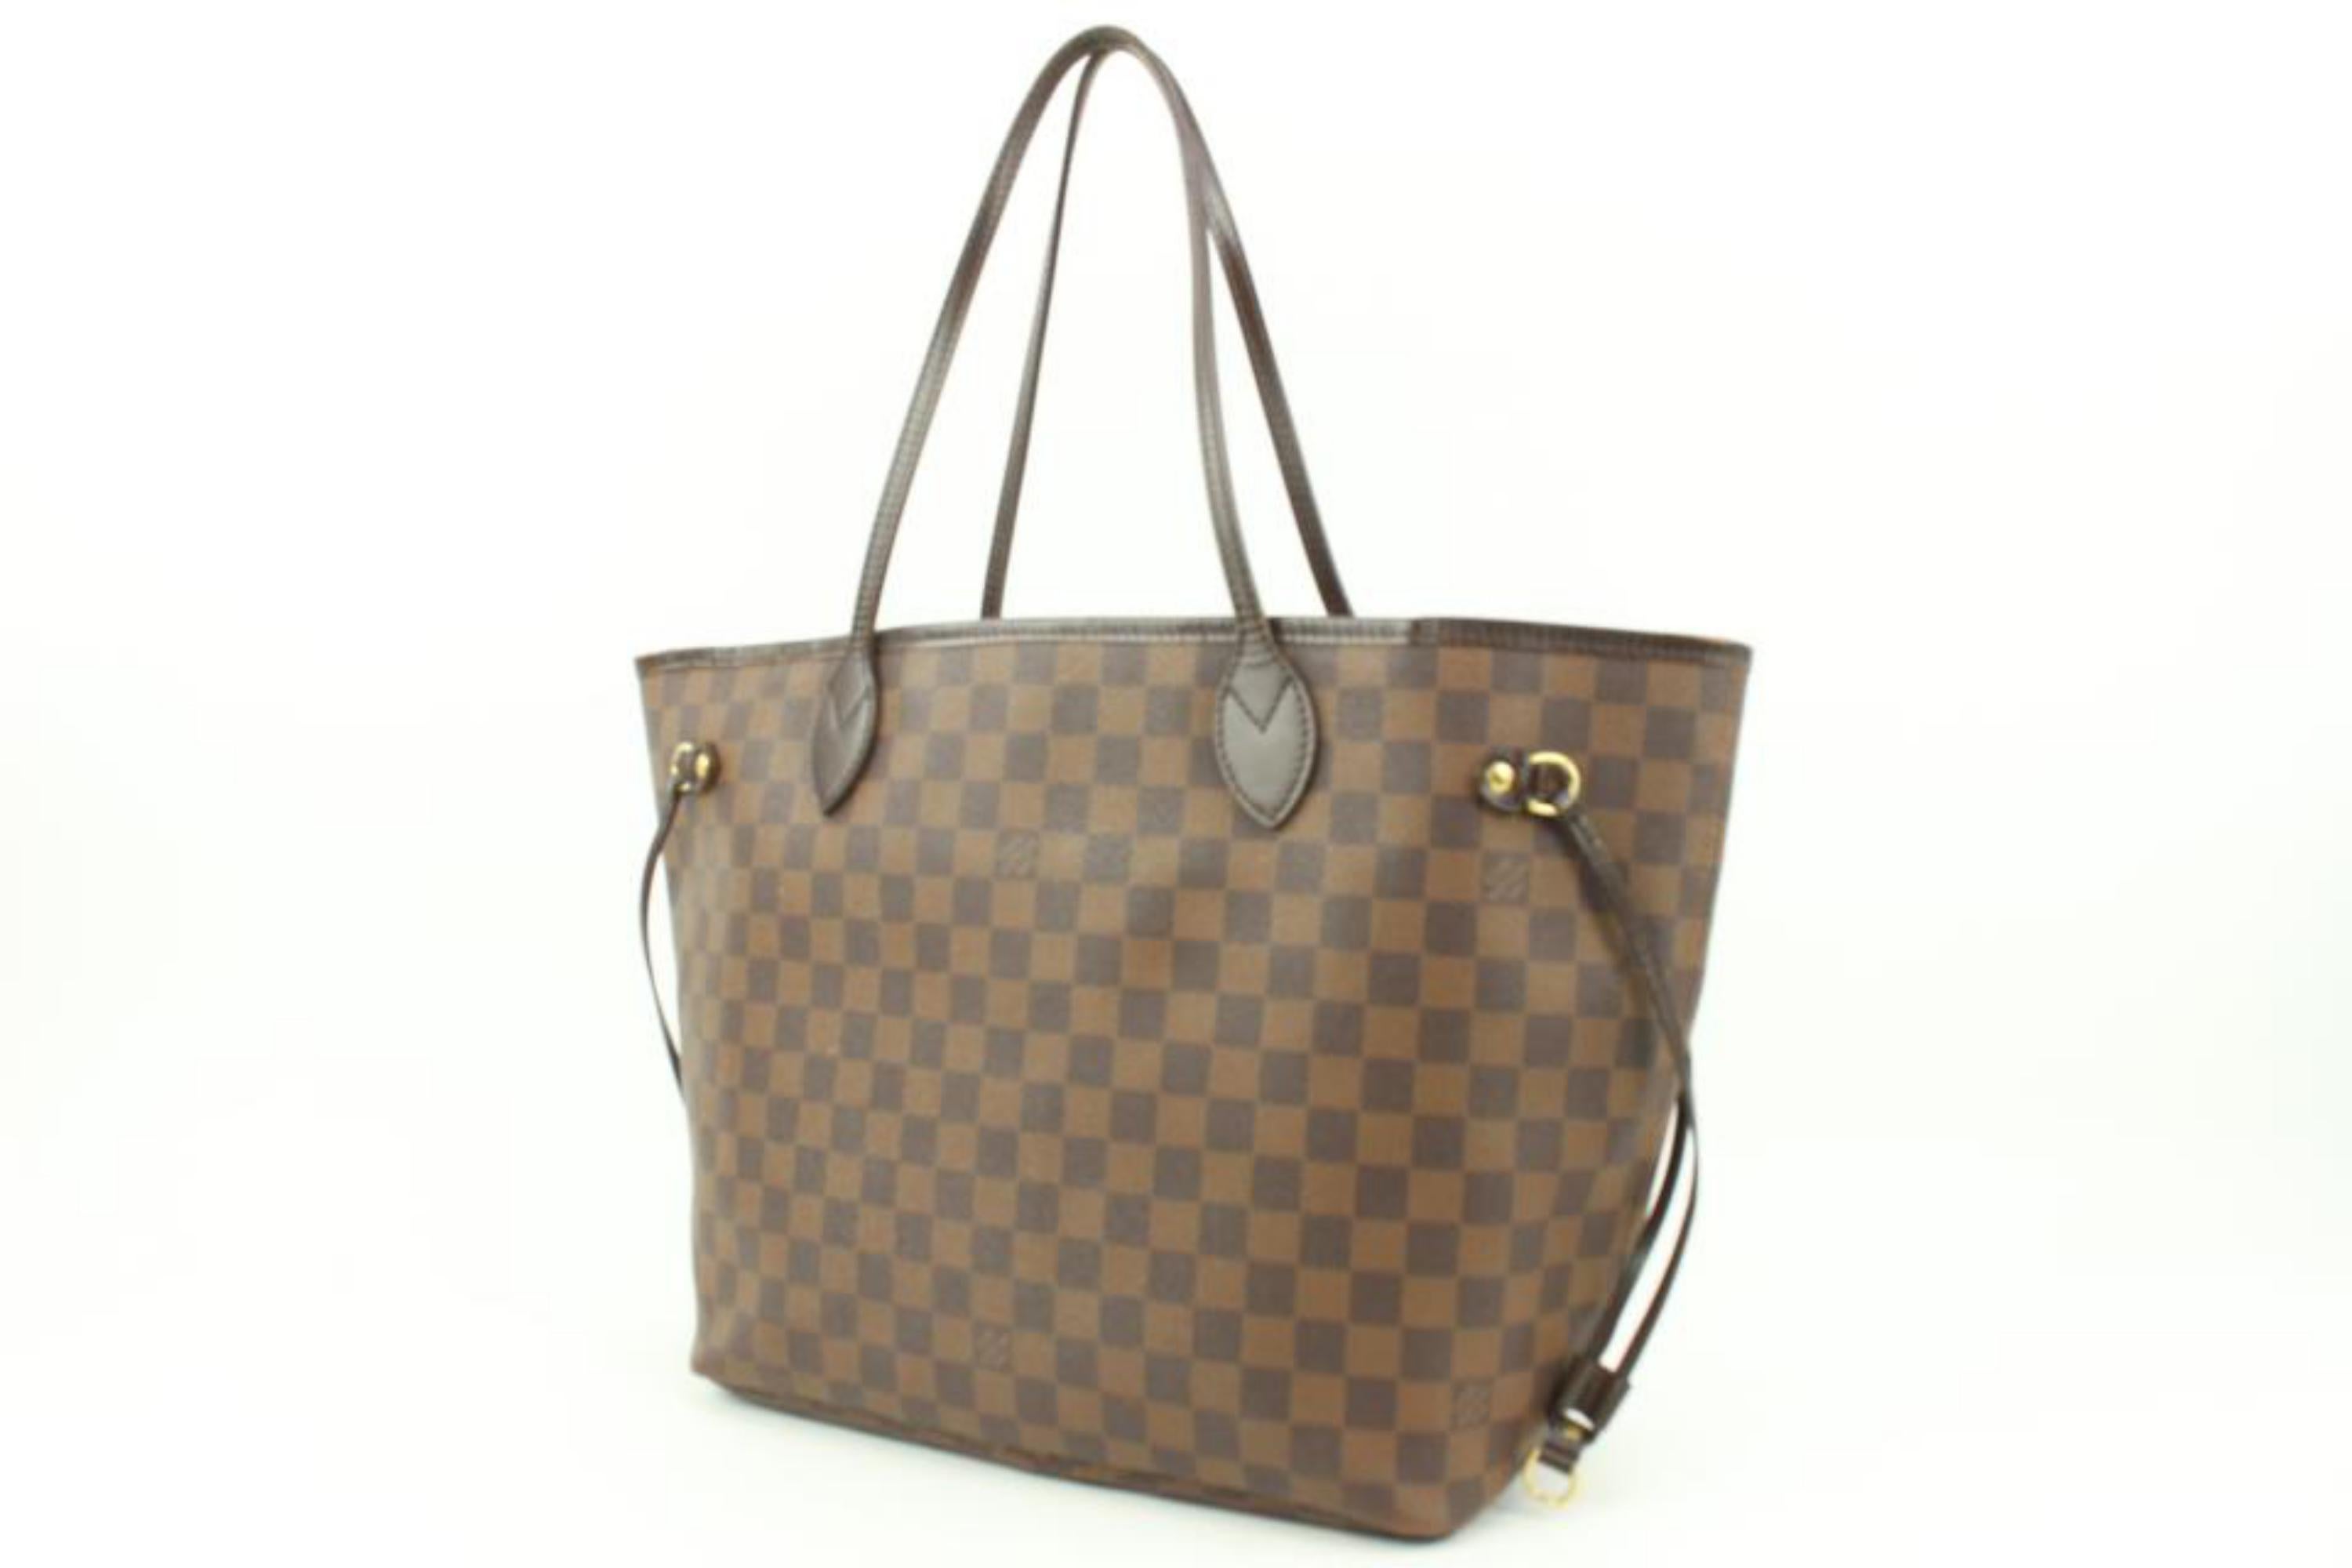 Louis Vuitton Damier Ebene Neverfull MM Tote Bag 62lv23s
Date Code/Serial Number: SP0131
Made In: France
Measurements: Length:  18